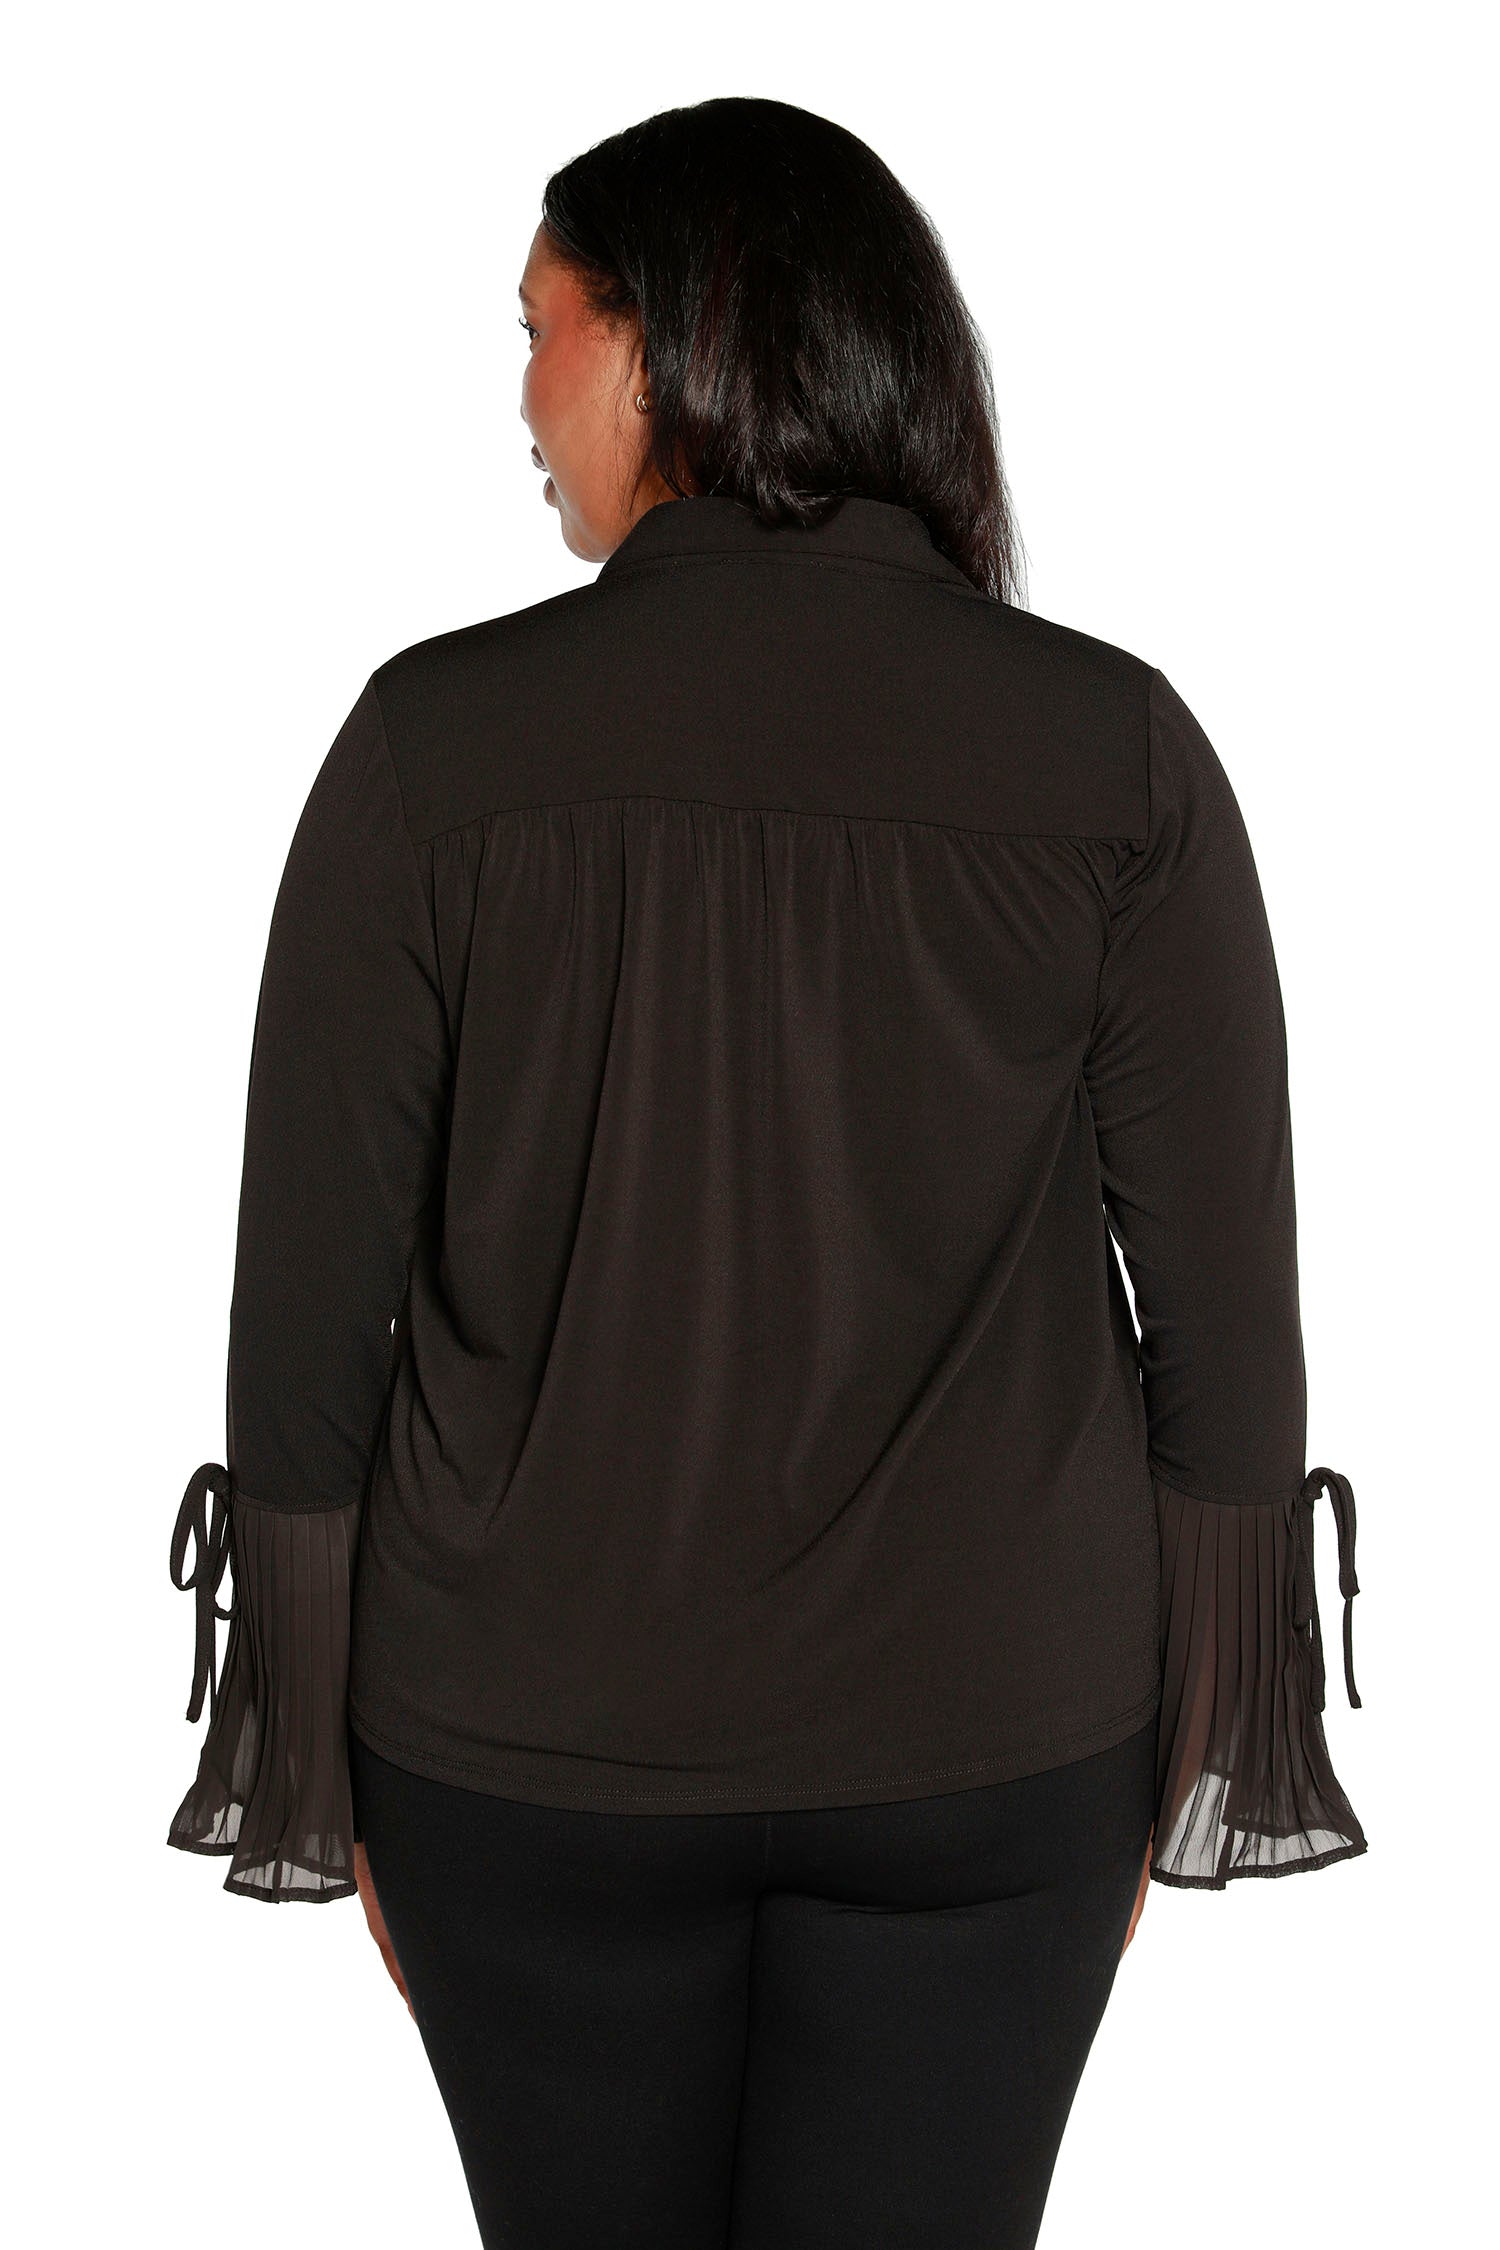 Women’s Button Front Blouse with Pleated Sleeves | Curvy